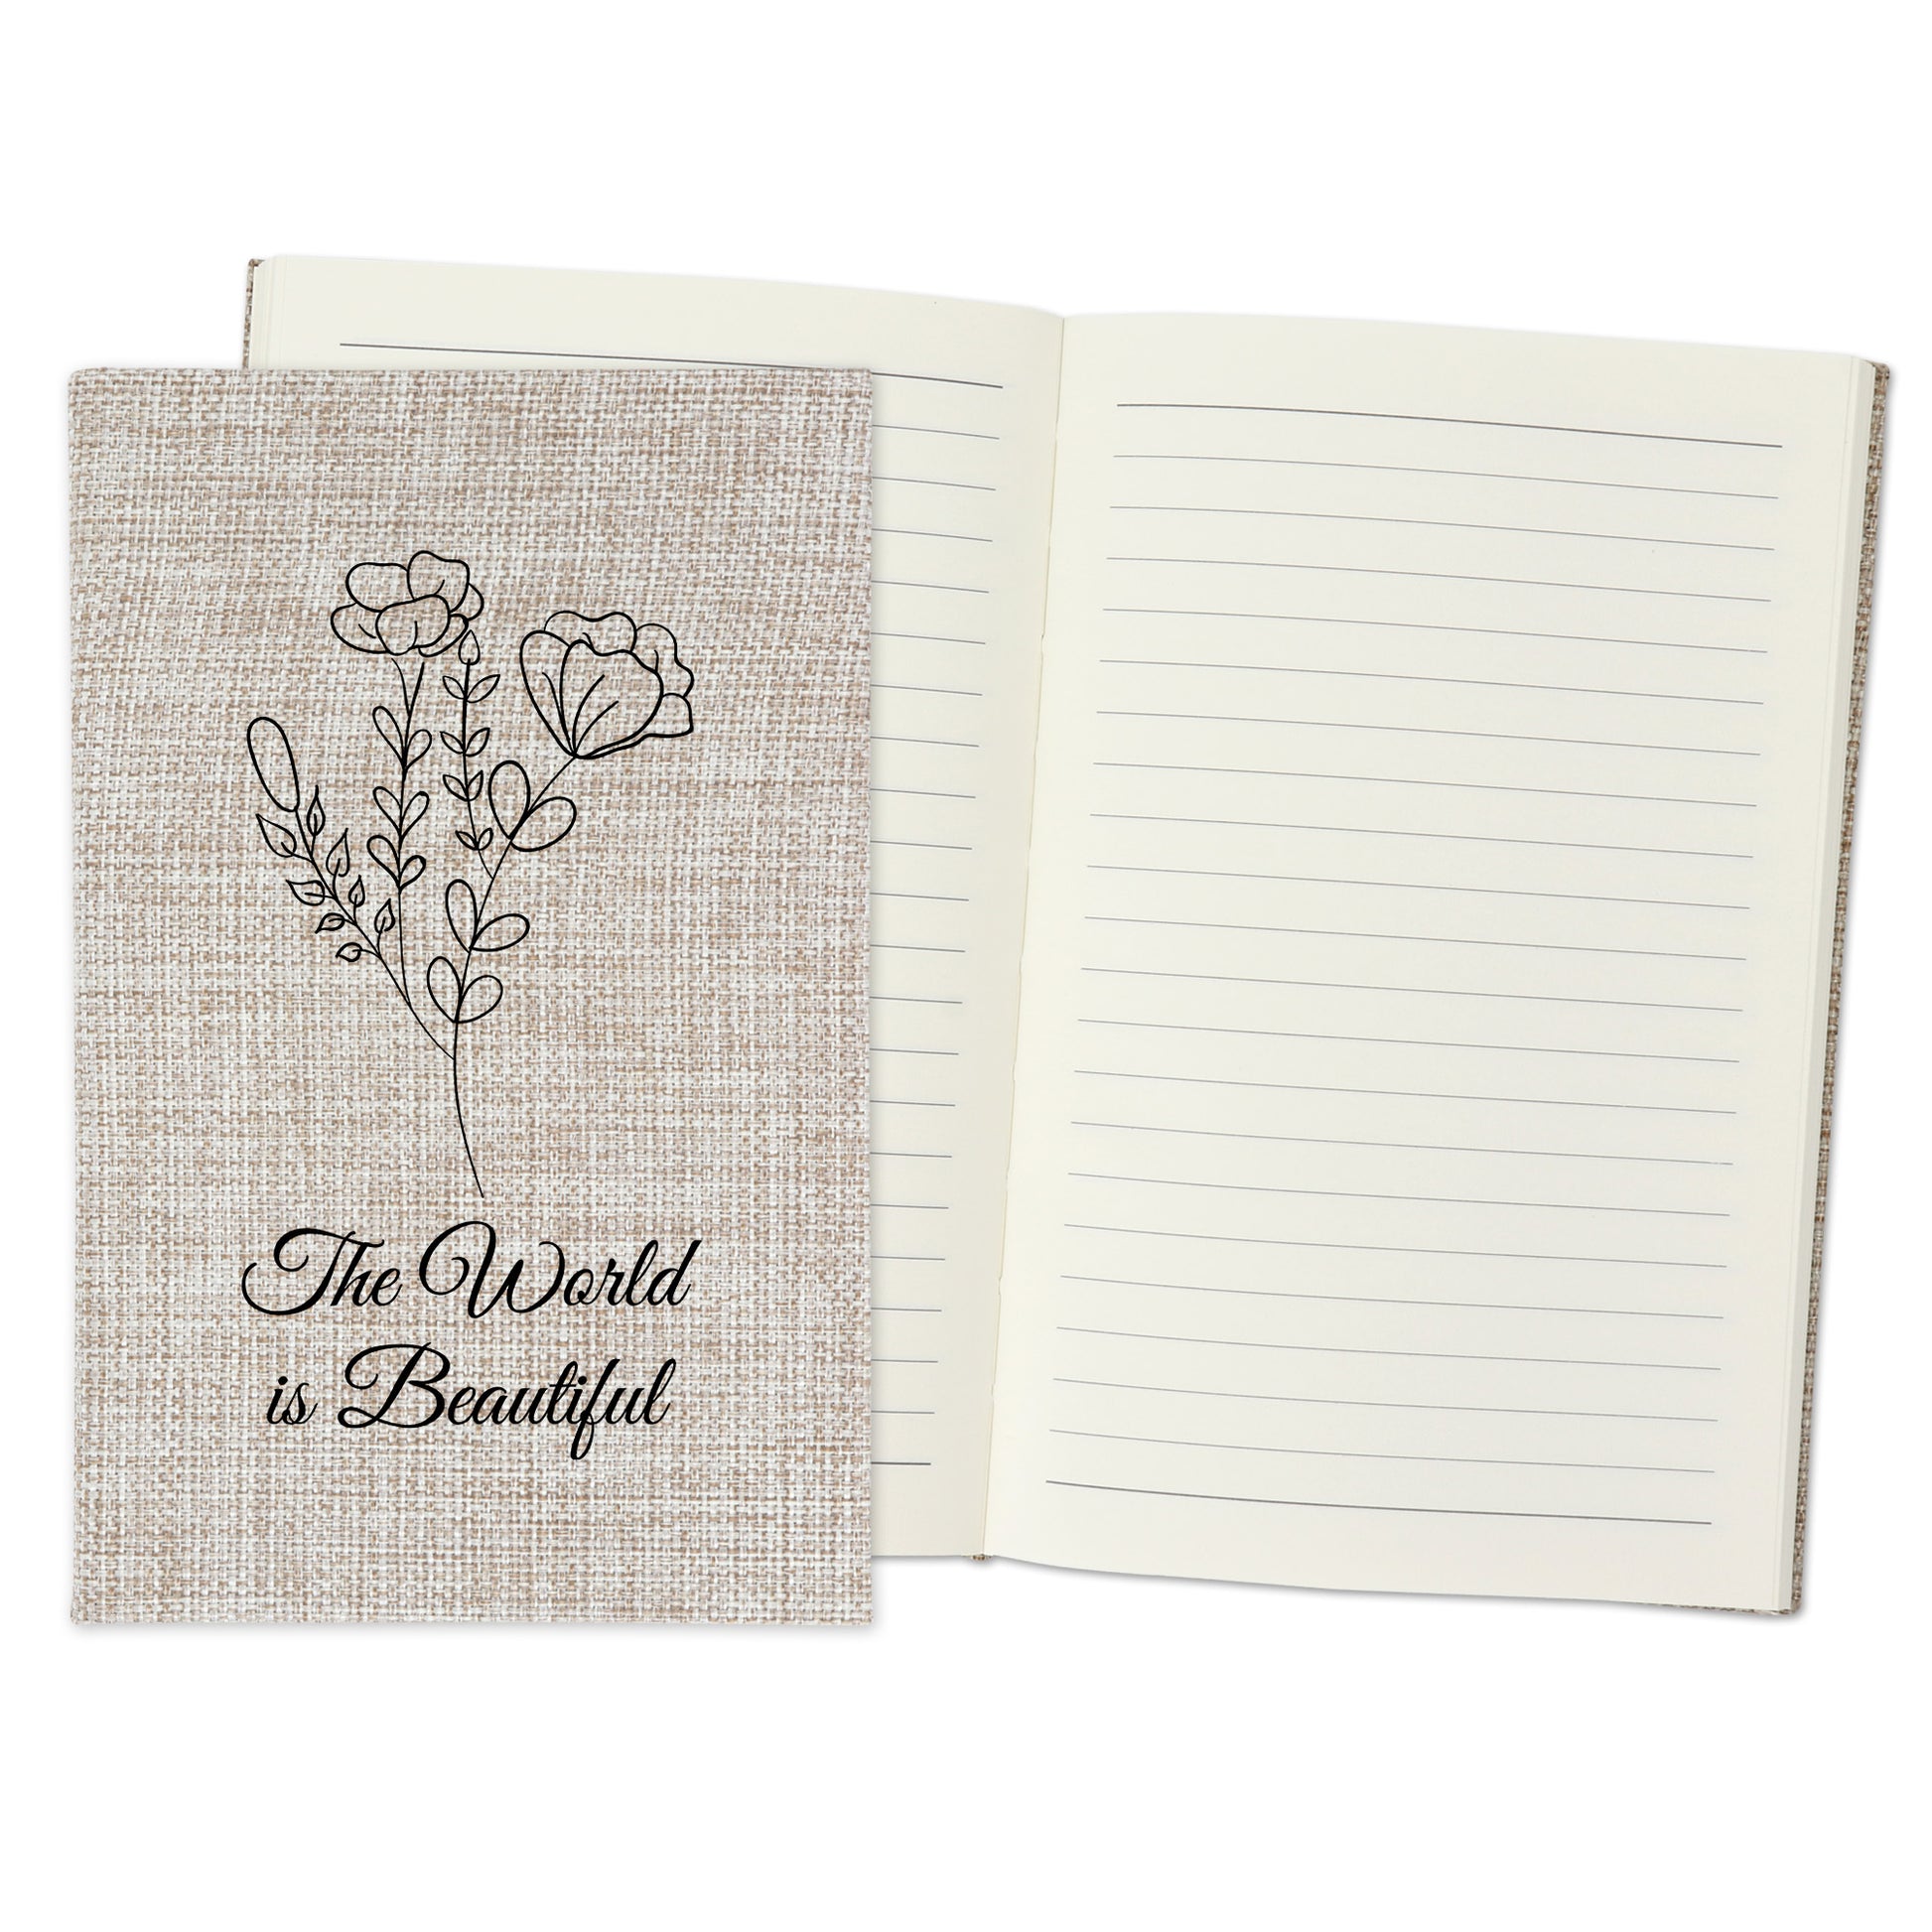 The World is Beautiful - Affirmation Quote Burlap Notebook Journal with Lined Pages